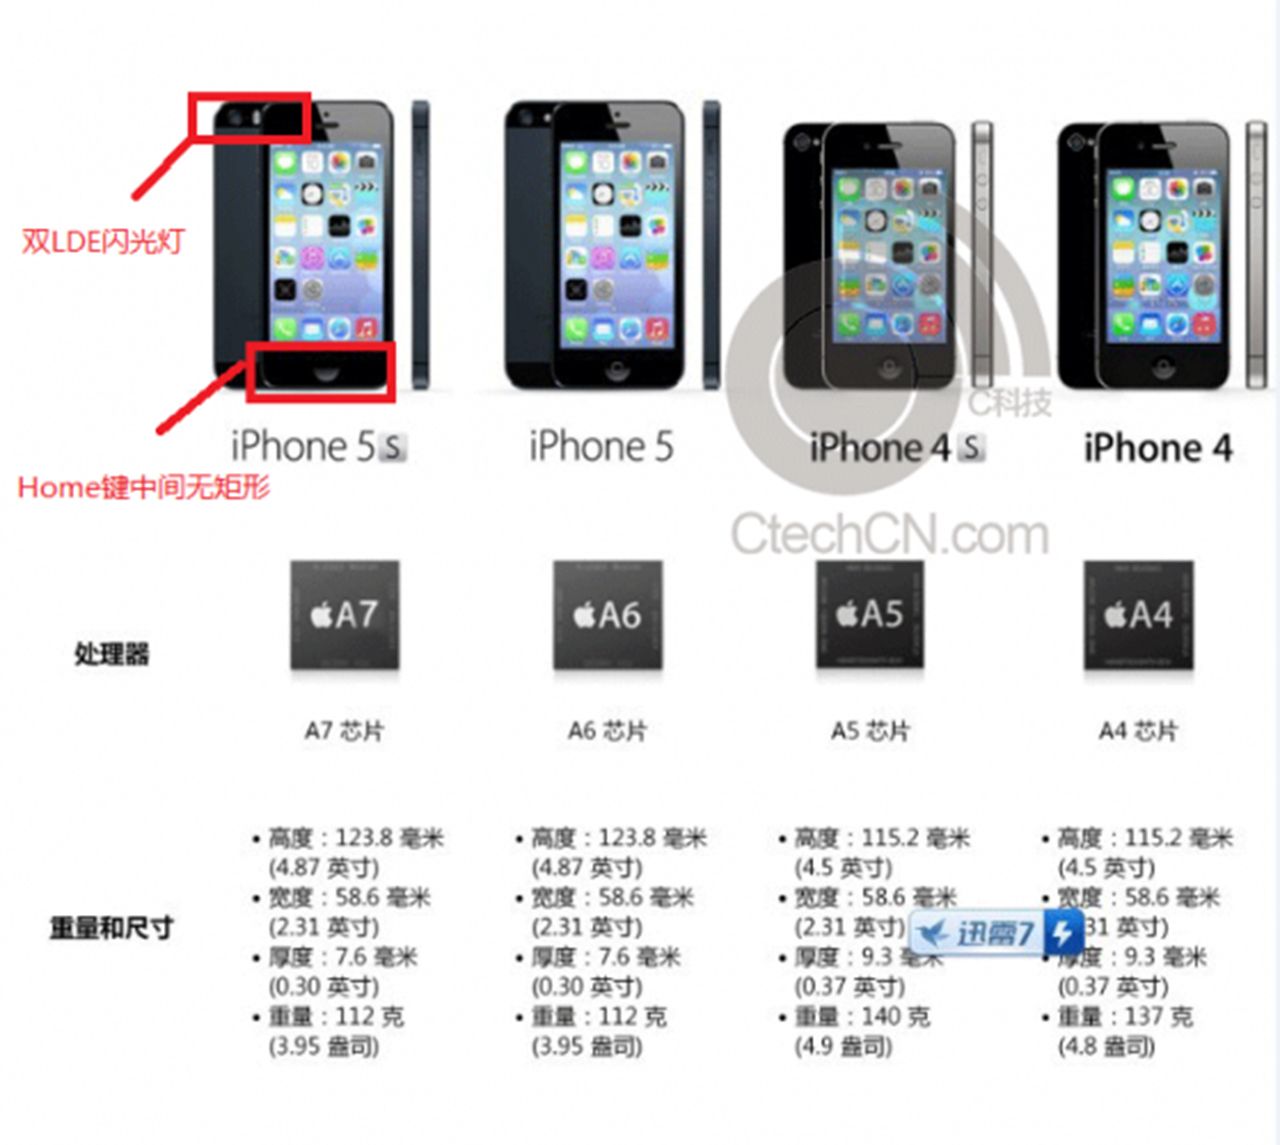 iphone 5s fingerprint reader and upgraded camera spotted in leaked marketing materials image 1